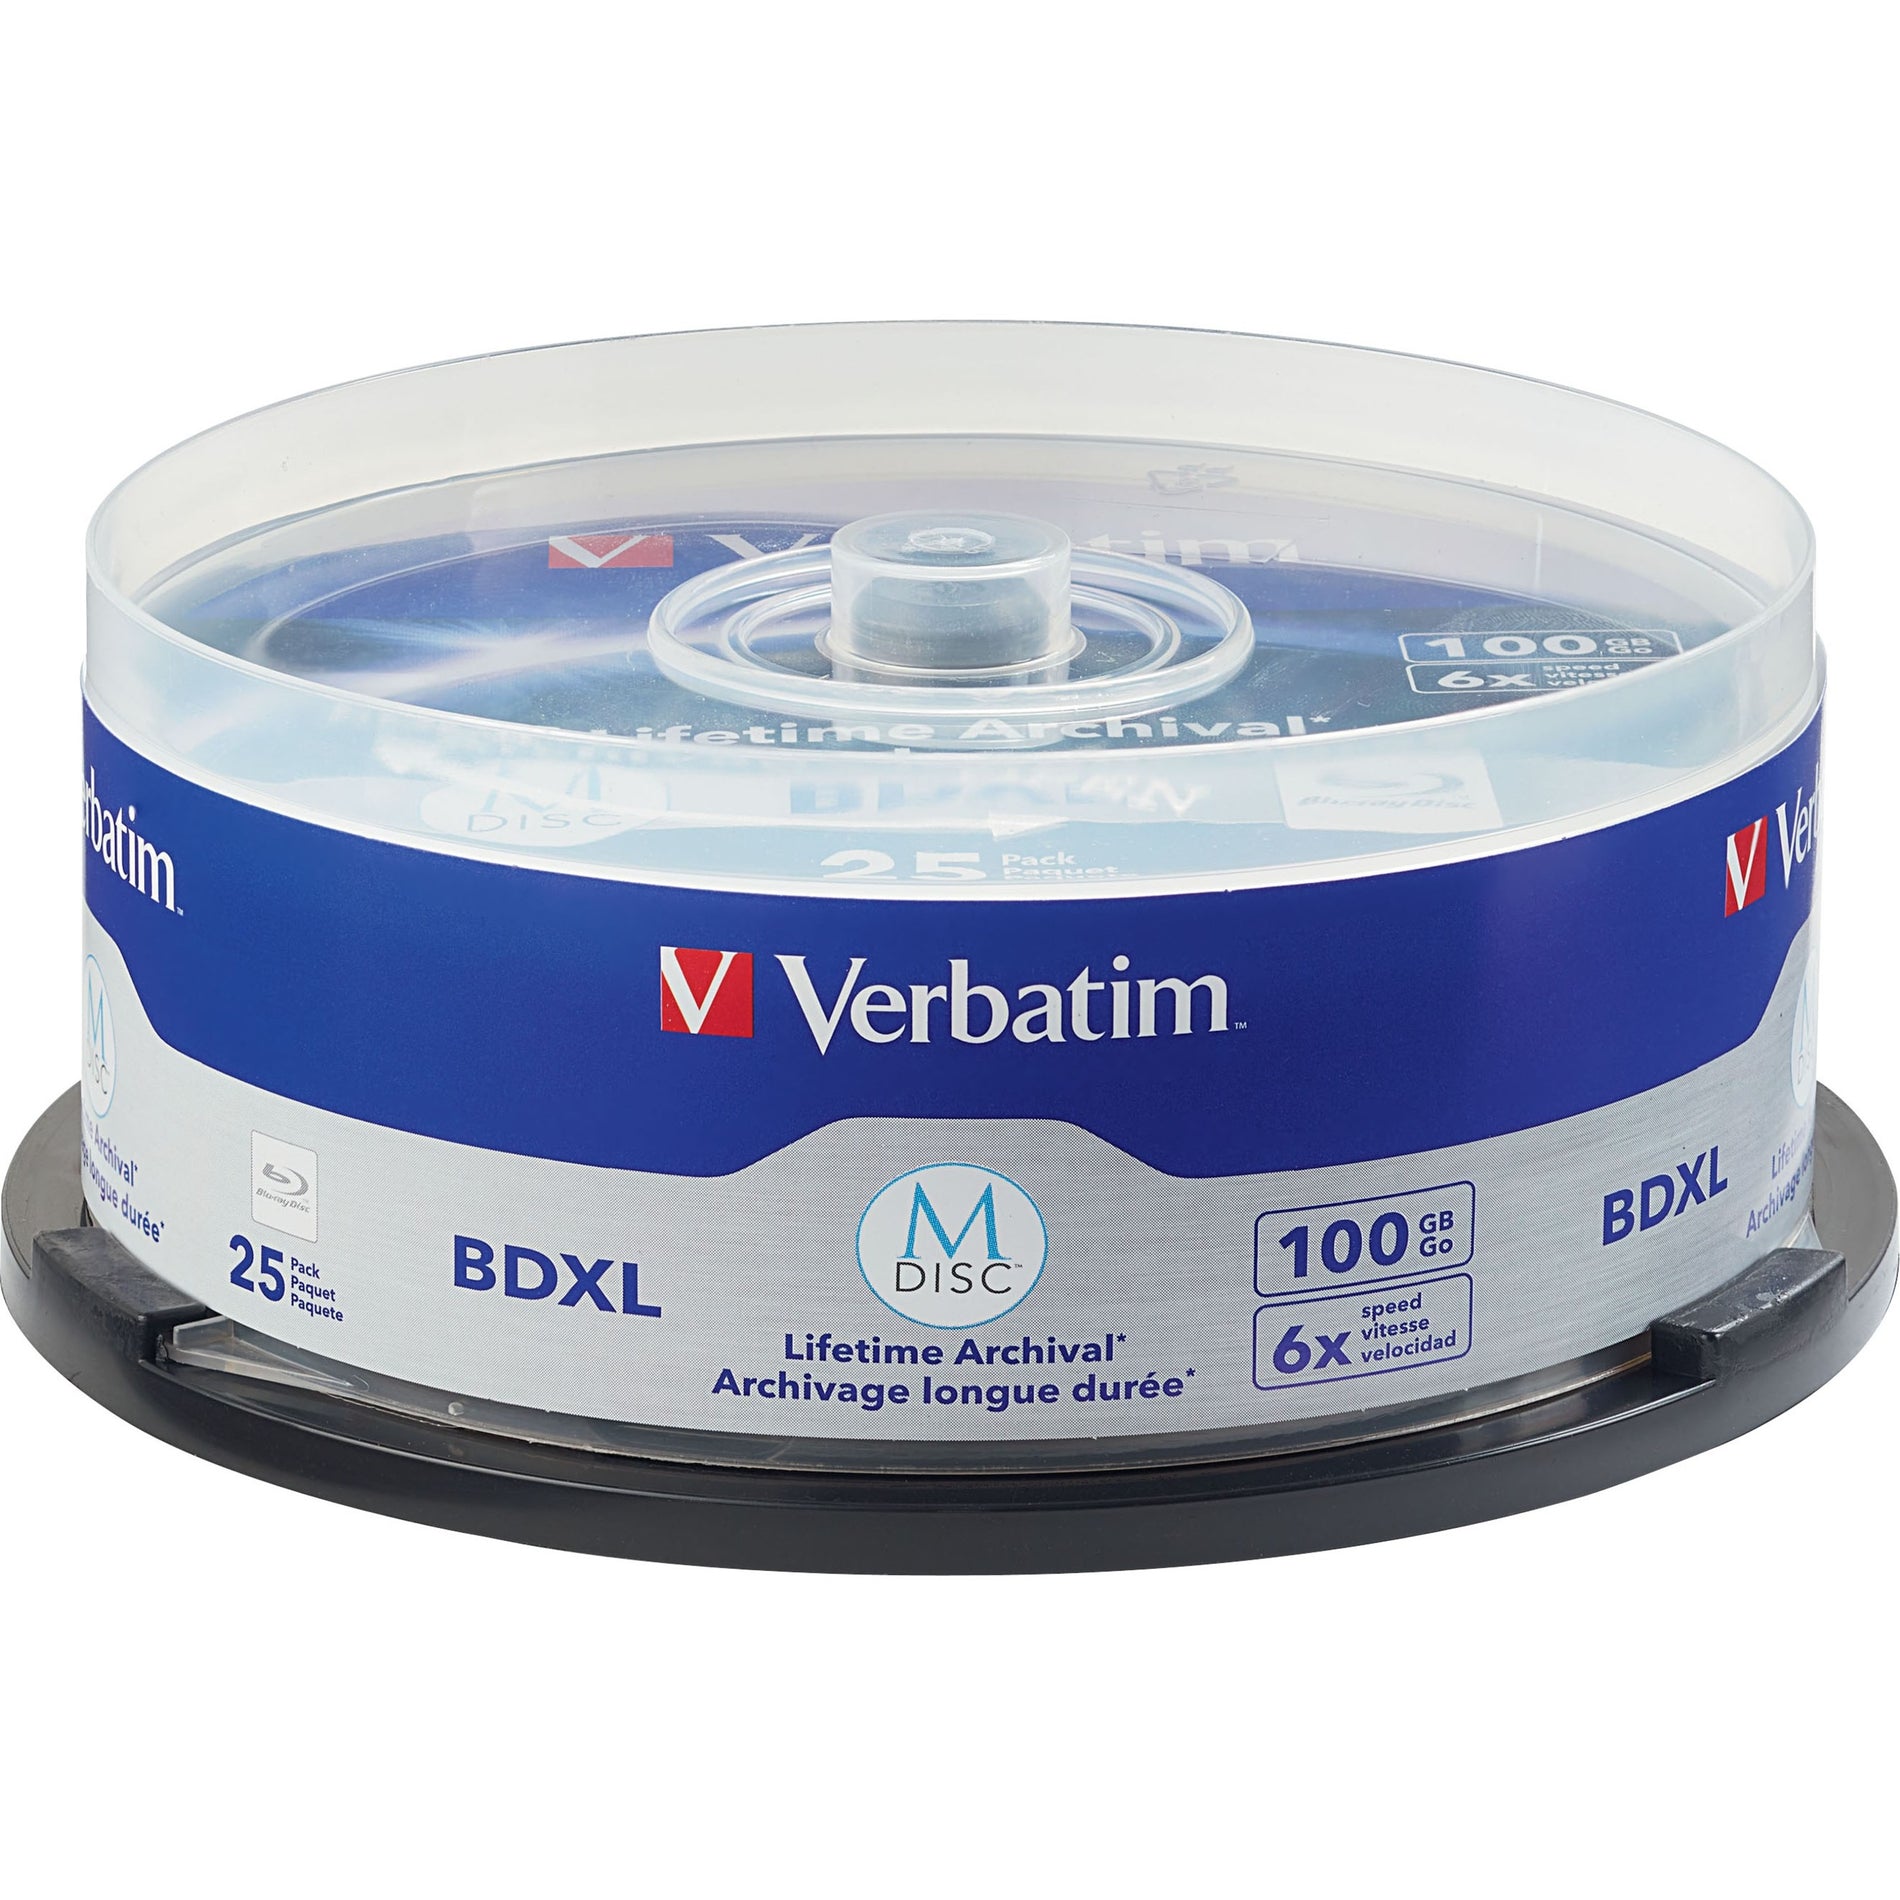 Verbatim 98914 M-Disc BDXL 100GB 6X with Branded Surface - 25pk Spindle, Blu-ray Recordable Media